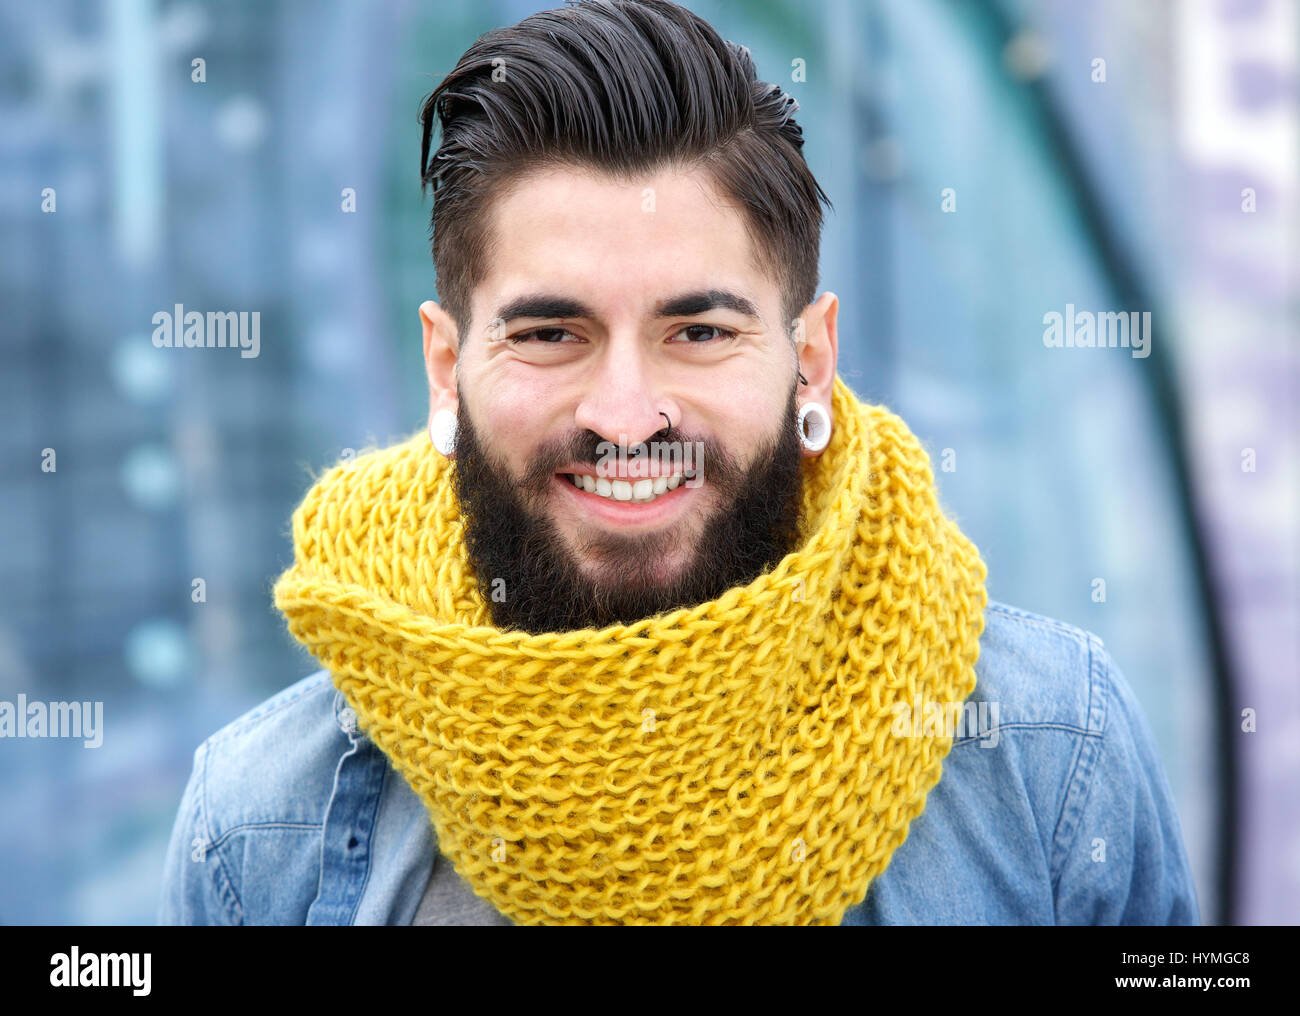 Close up portrait of a young modern man with beard smiling Stock Photo